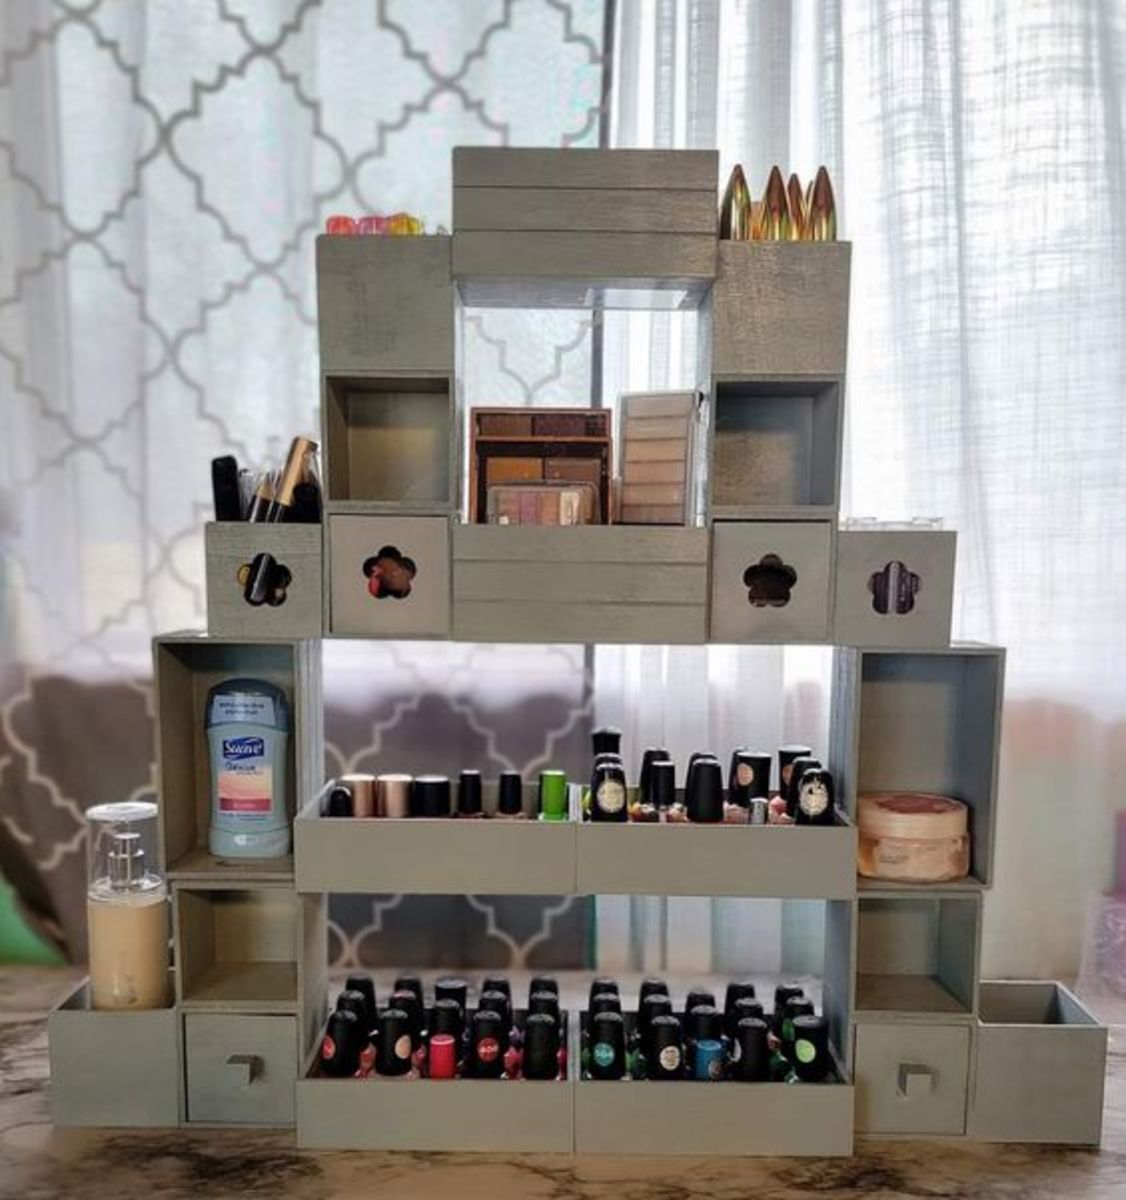 Makeup Storage Use wooden boxes from Dollar Tree to customize a makeup organizer tower.